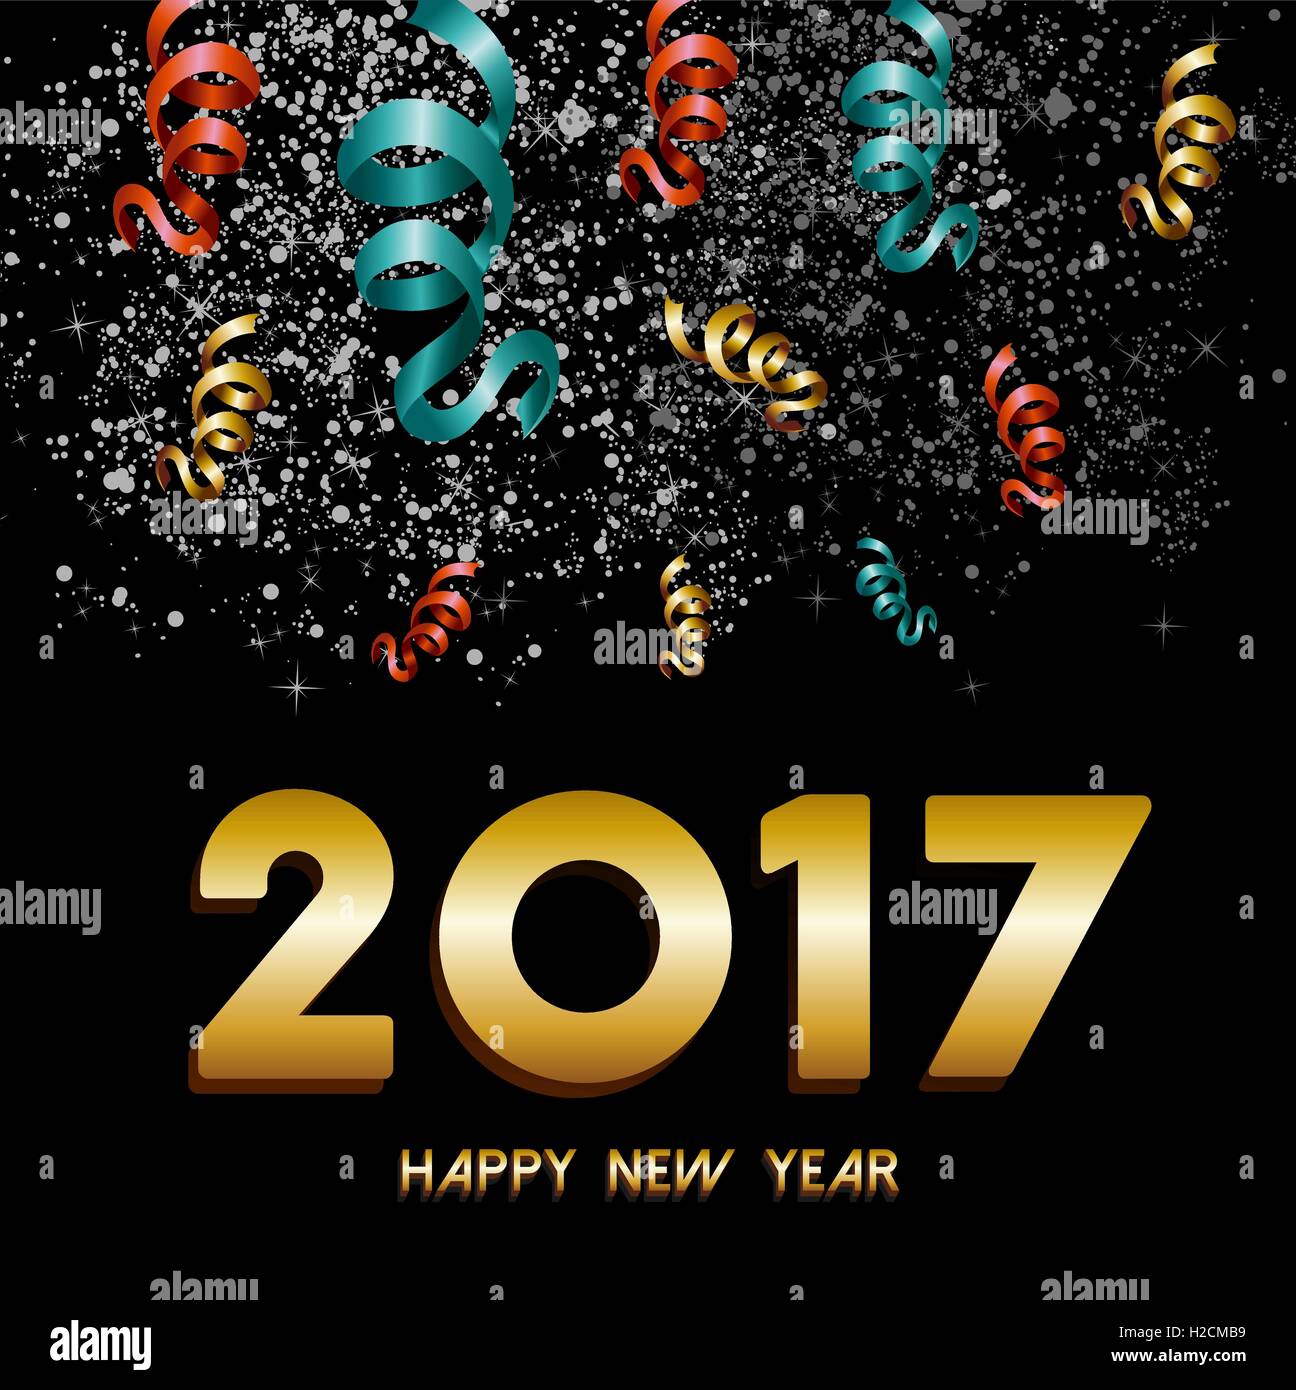 Happy New Year 2017 greeting card, gold text with night sky firework and confetti explosion background. EPS10 vector. Stock Vector